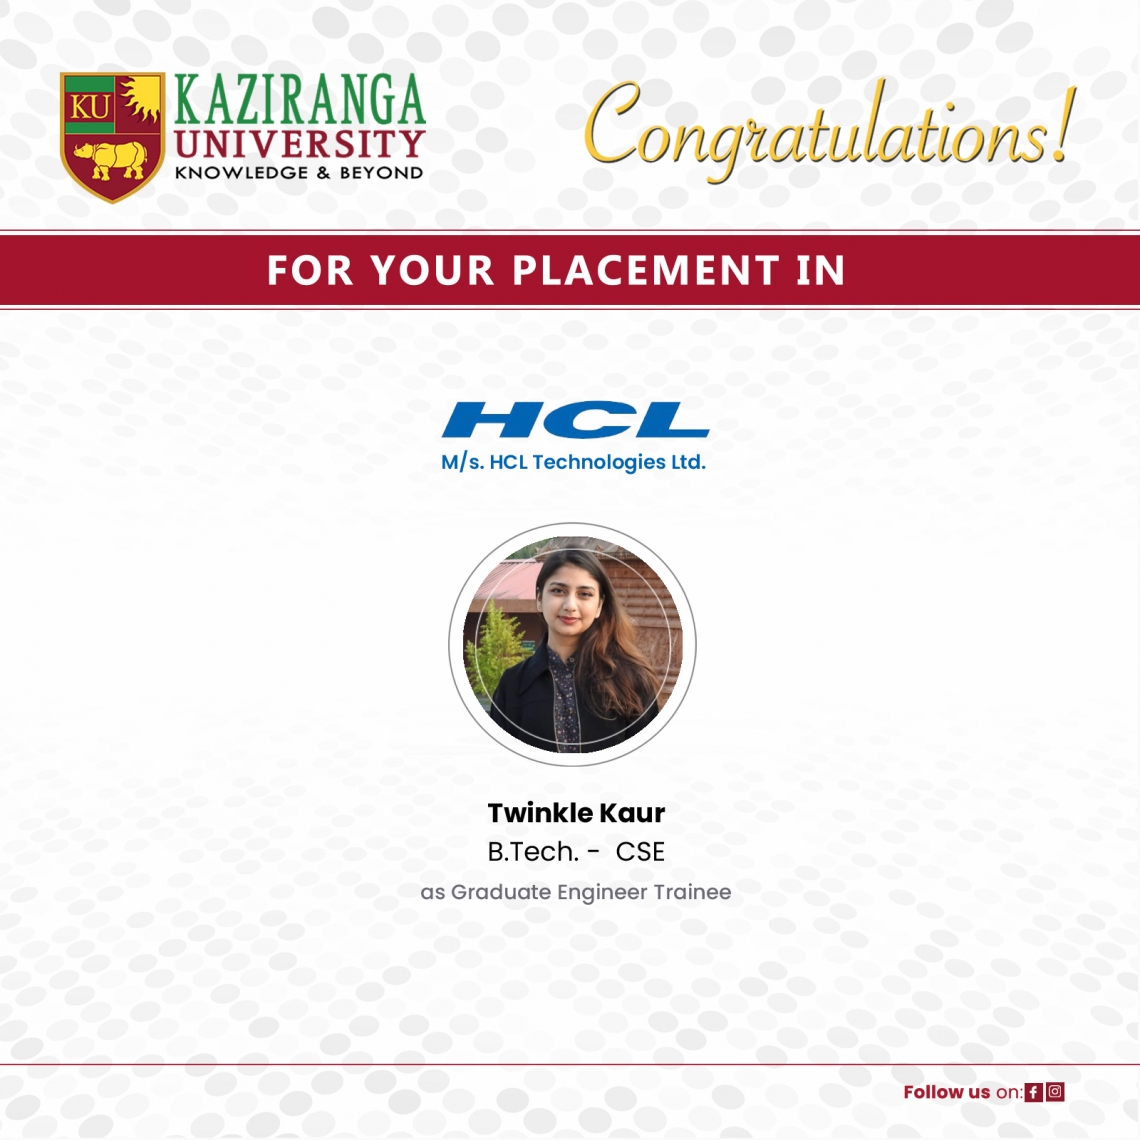 Ms Twinkle Kaur for her placement at M/s. HCL Technologies Ltd. for the position of Graduate Engineer Trainee.